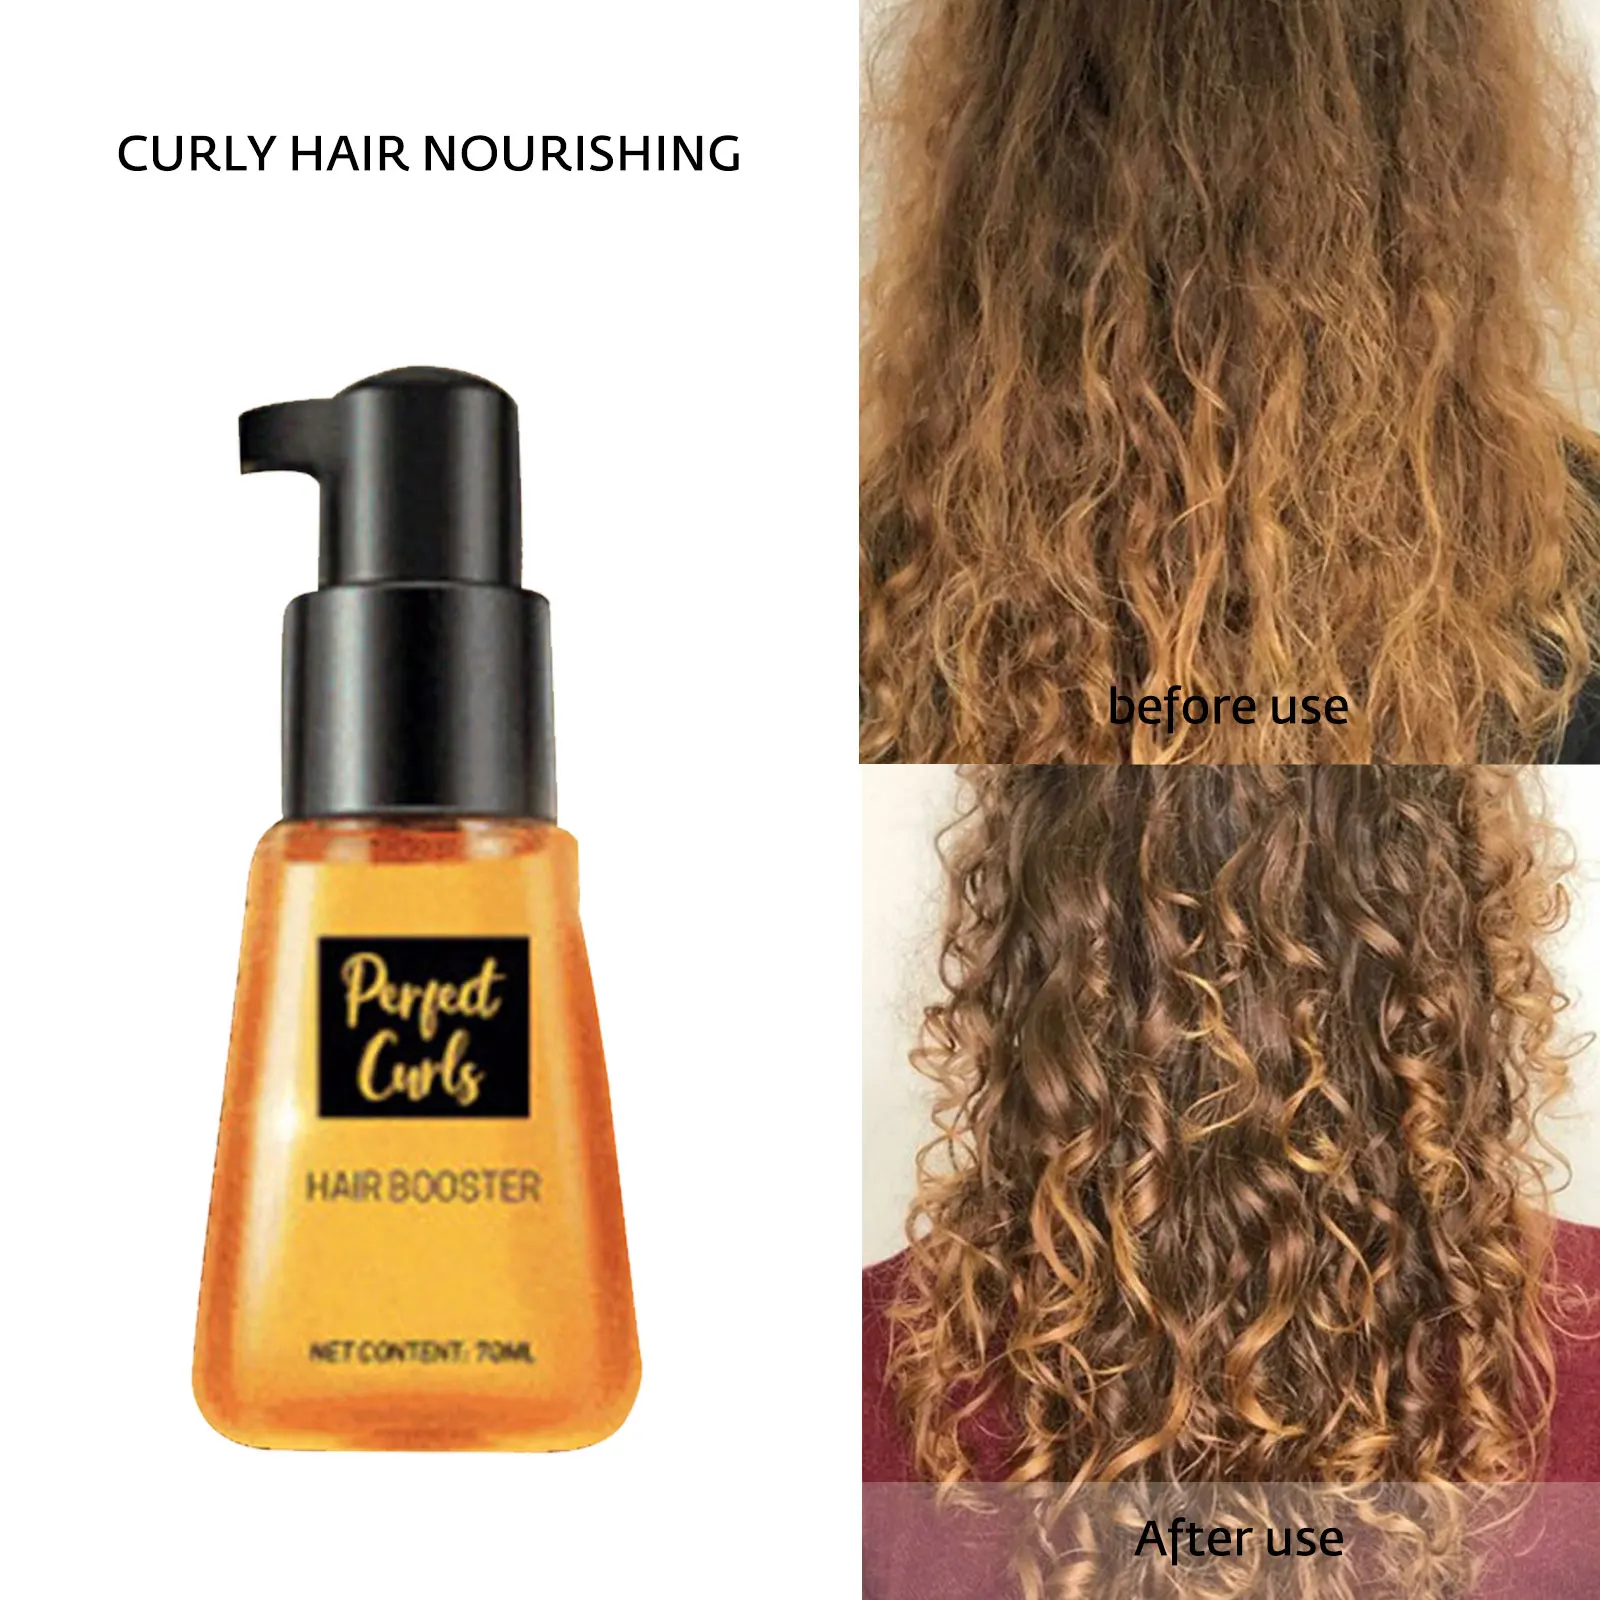 

Perfect Cute Curls Hair Booster Curl Defining Styling Enhancing Spray For Curly Wavy Hair Curl Enhancers